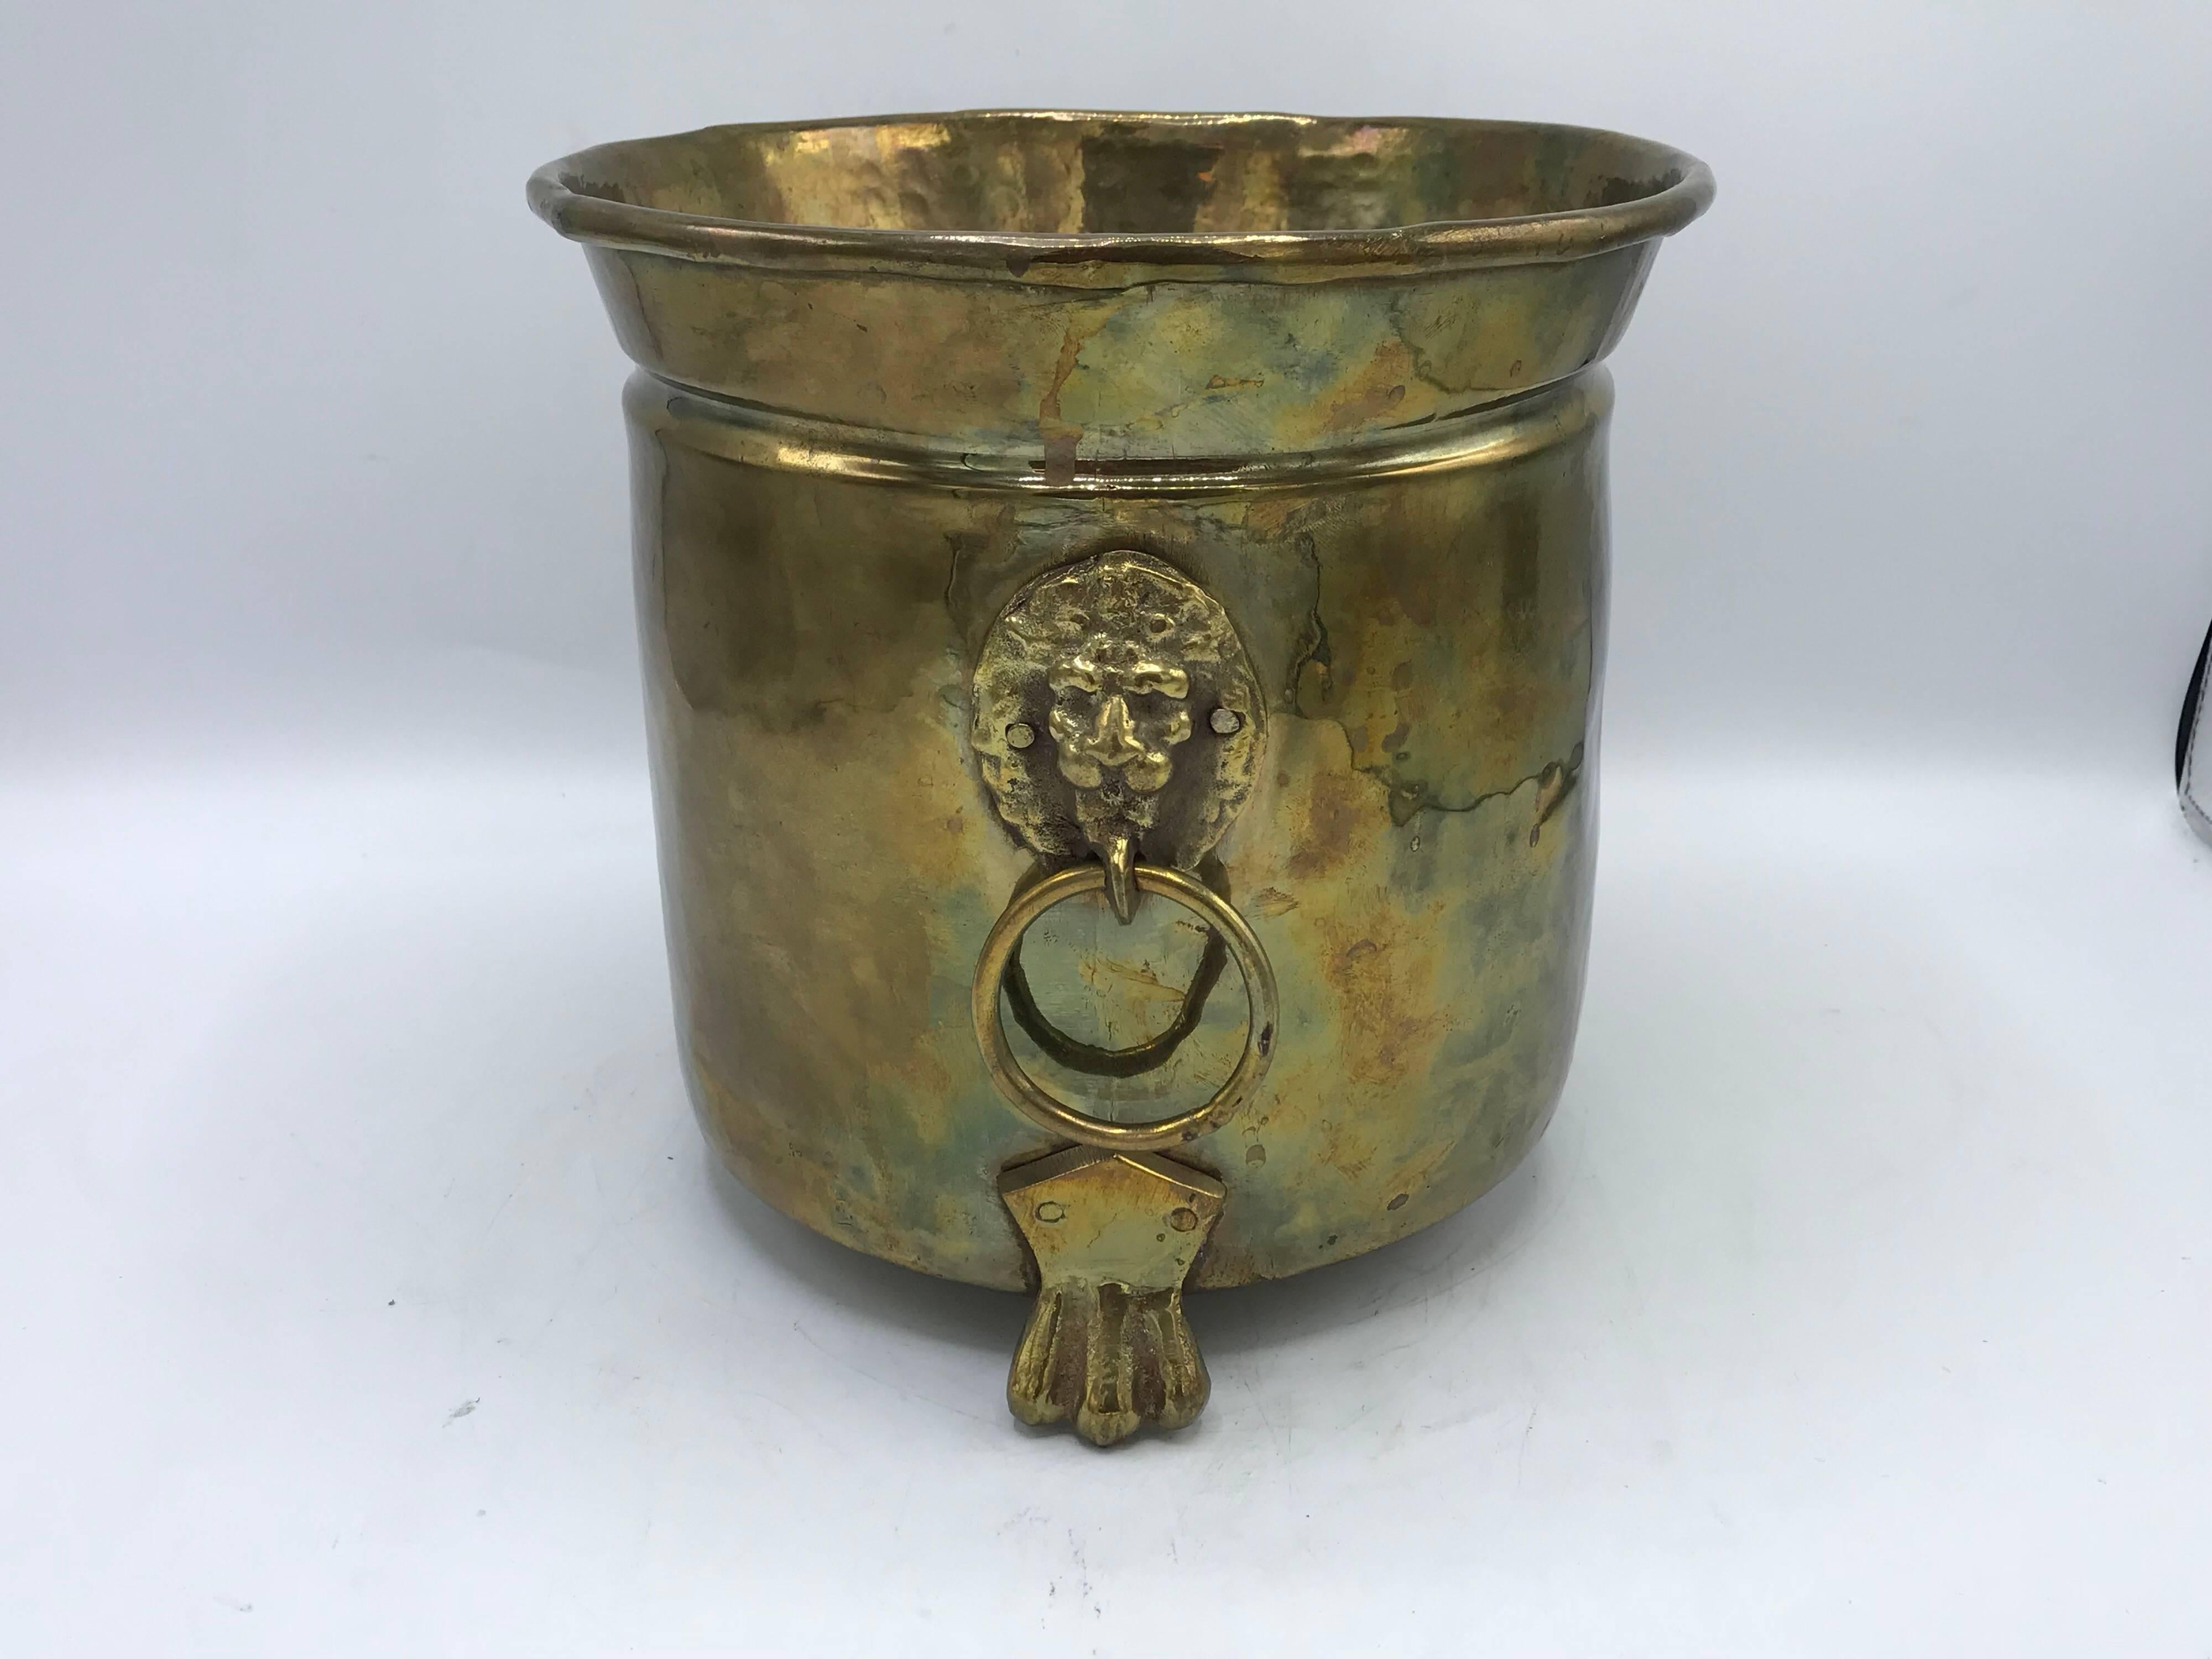 Hollywood Regency 1970s Italian Hammered Brass Cachepot Planter with Lion Head and Foot Motif